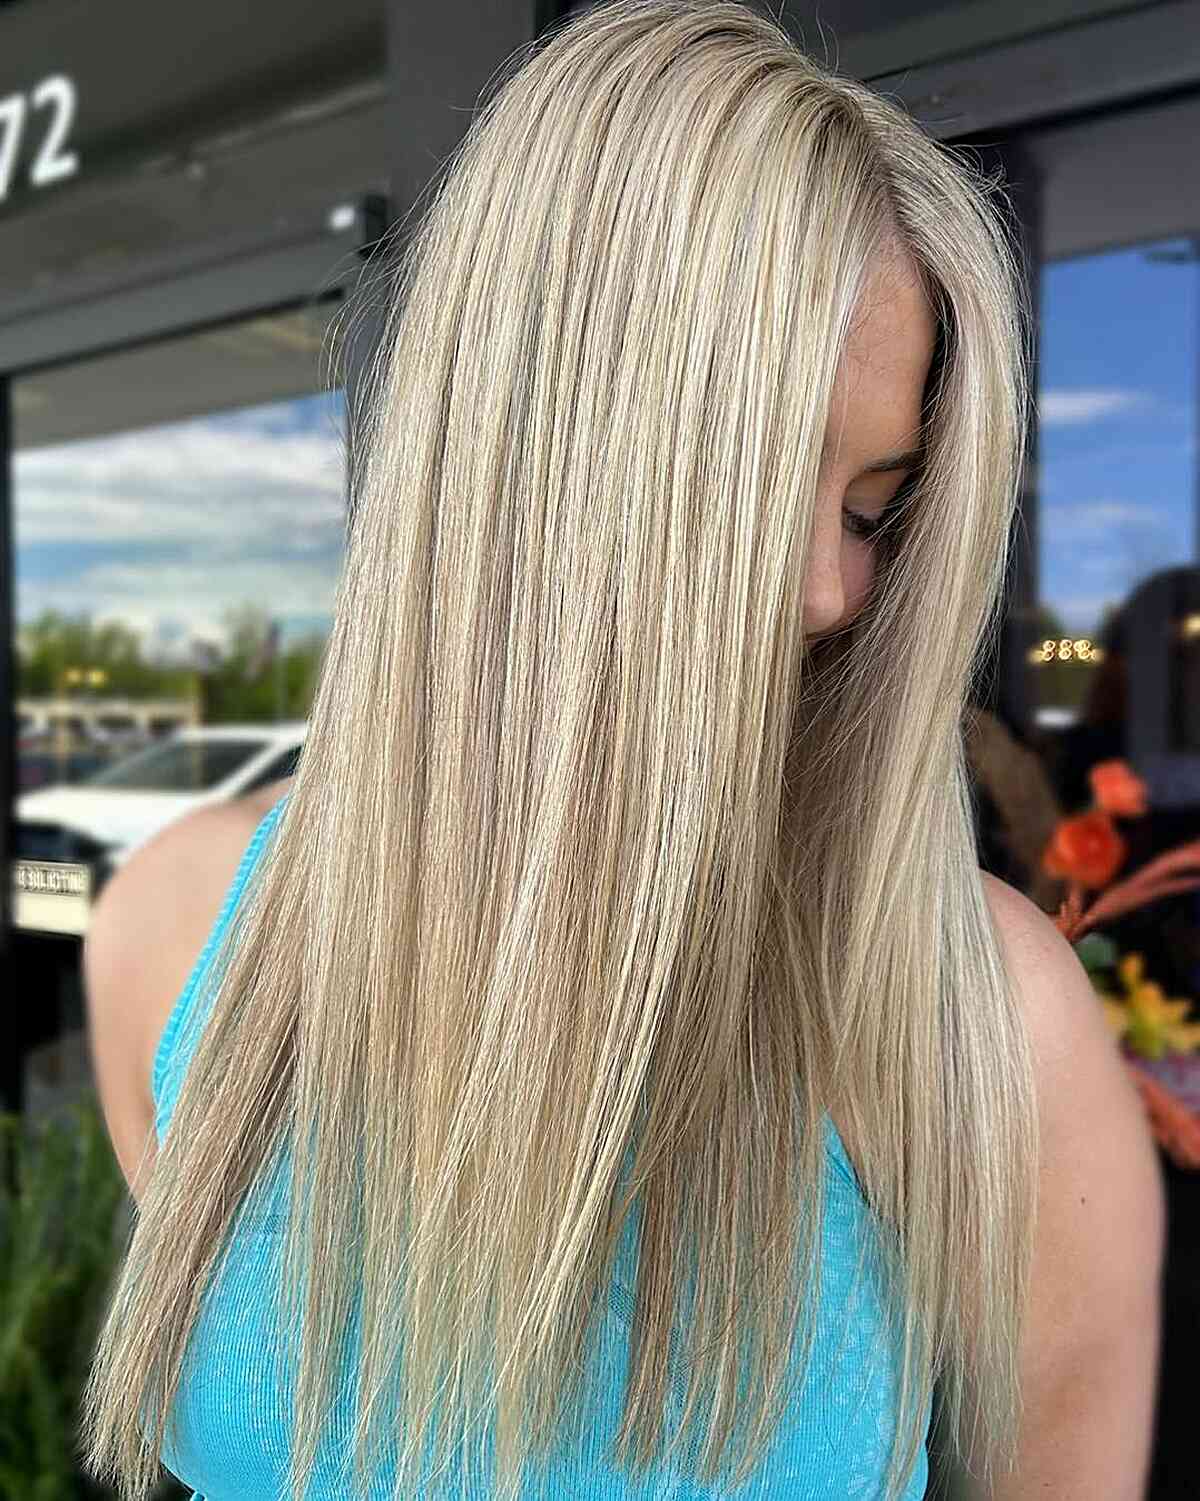 Chest-Length Blonde Straight Hair with Textured Ends for Graduation